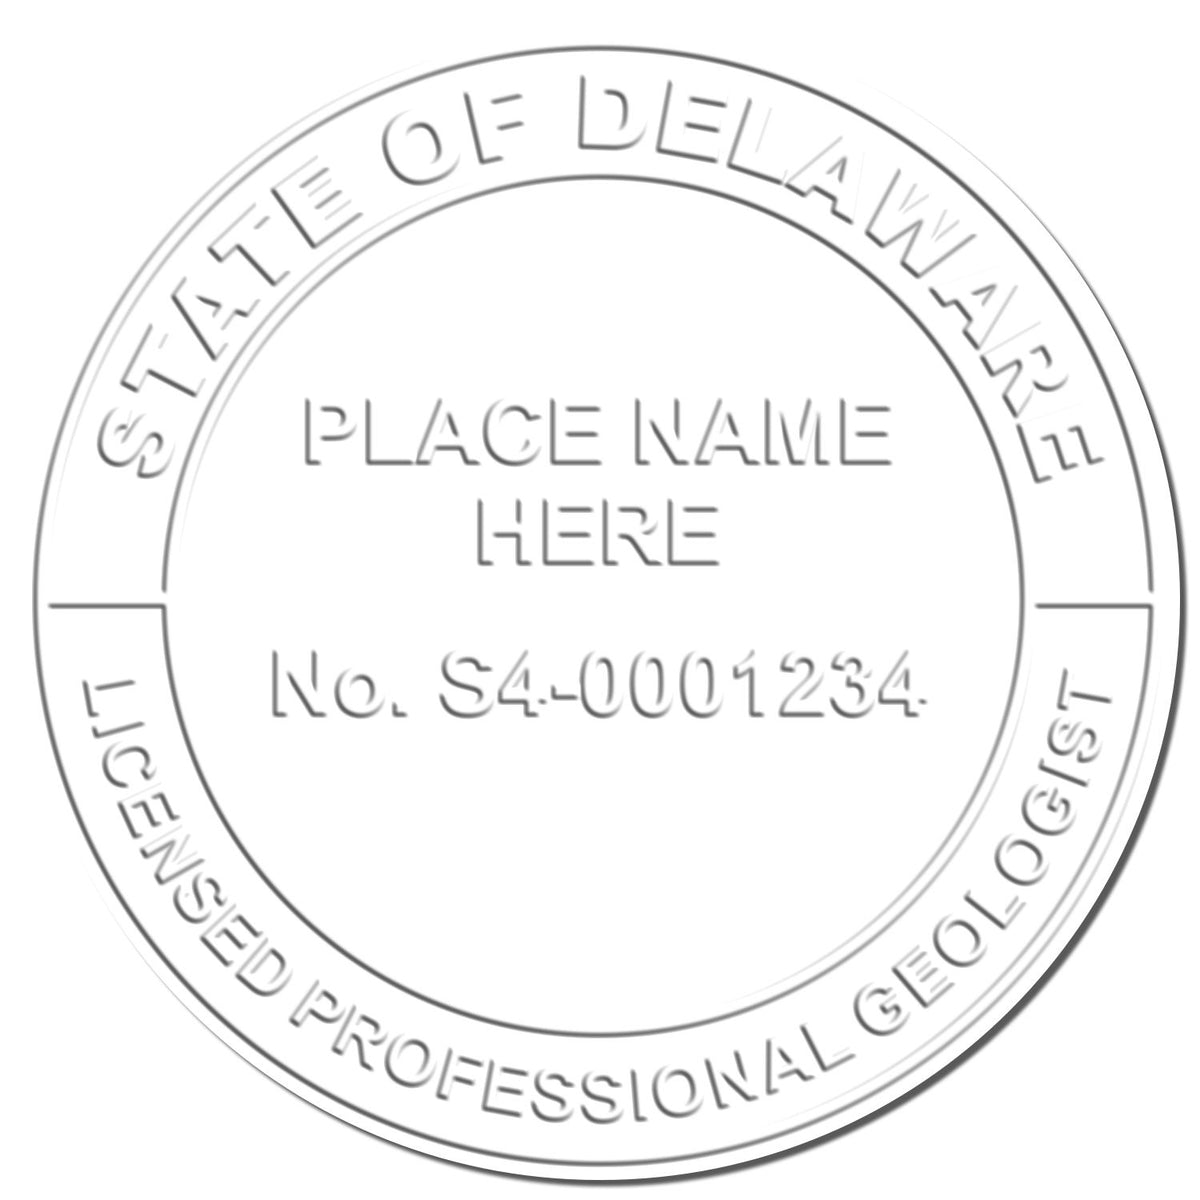 A photograph of the Hybrid Delaware Geologist Seal stamp impression reveals a vivid, professional image of the on paper.